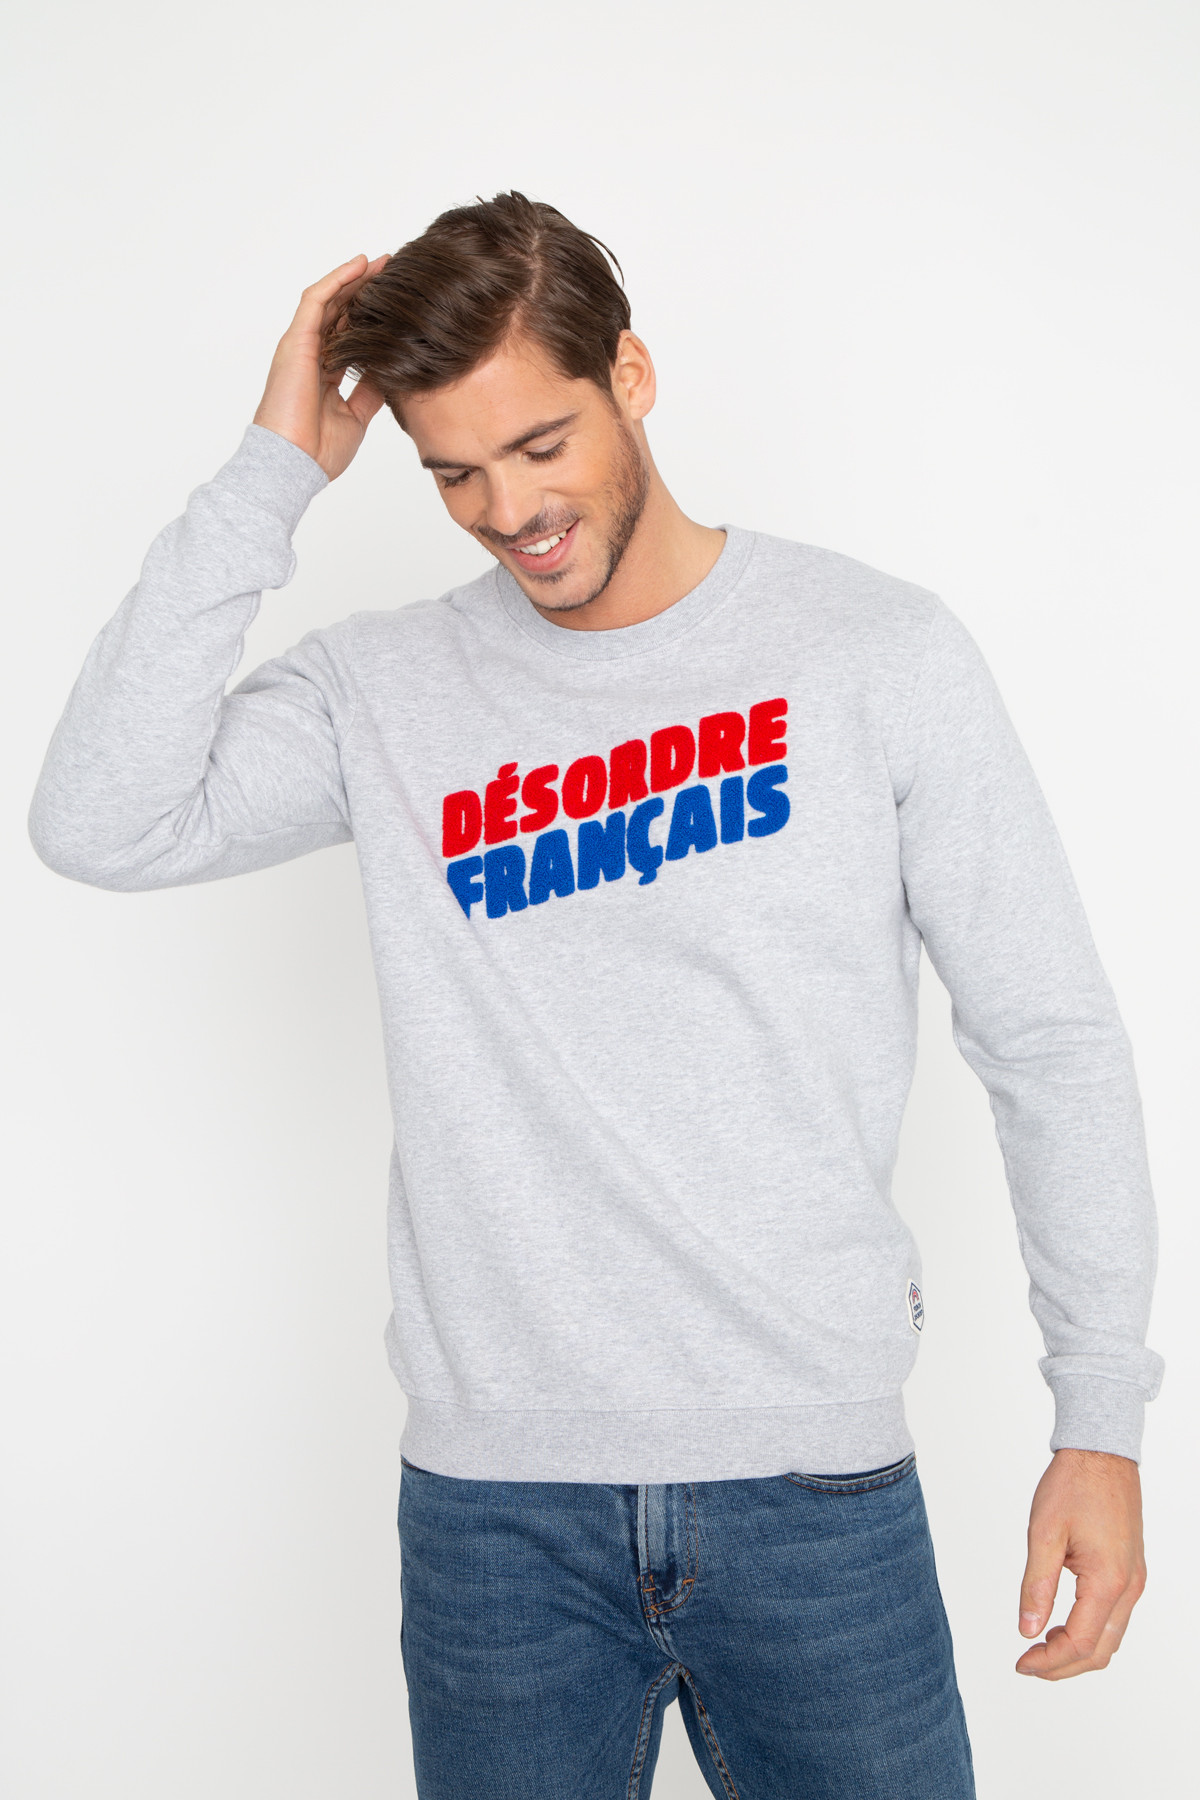 Sweat DESORDRE FRANCAIS French Disorder